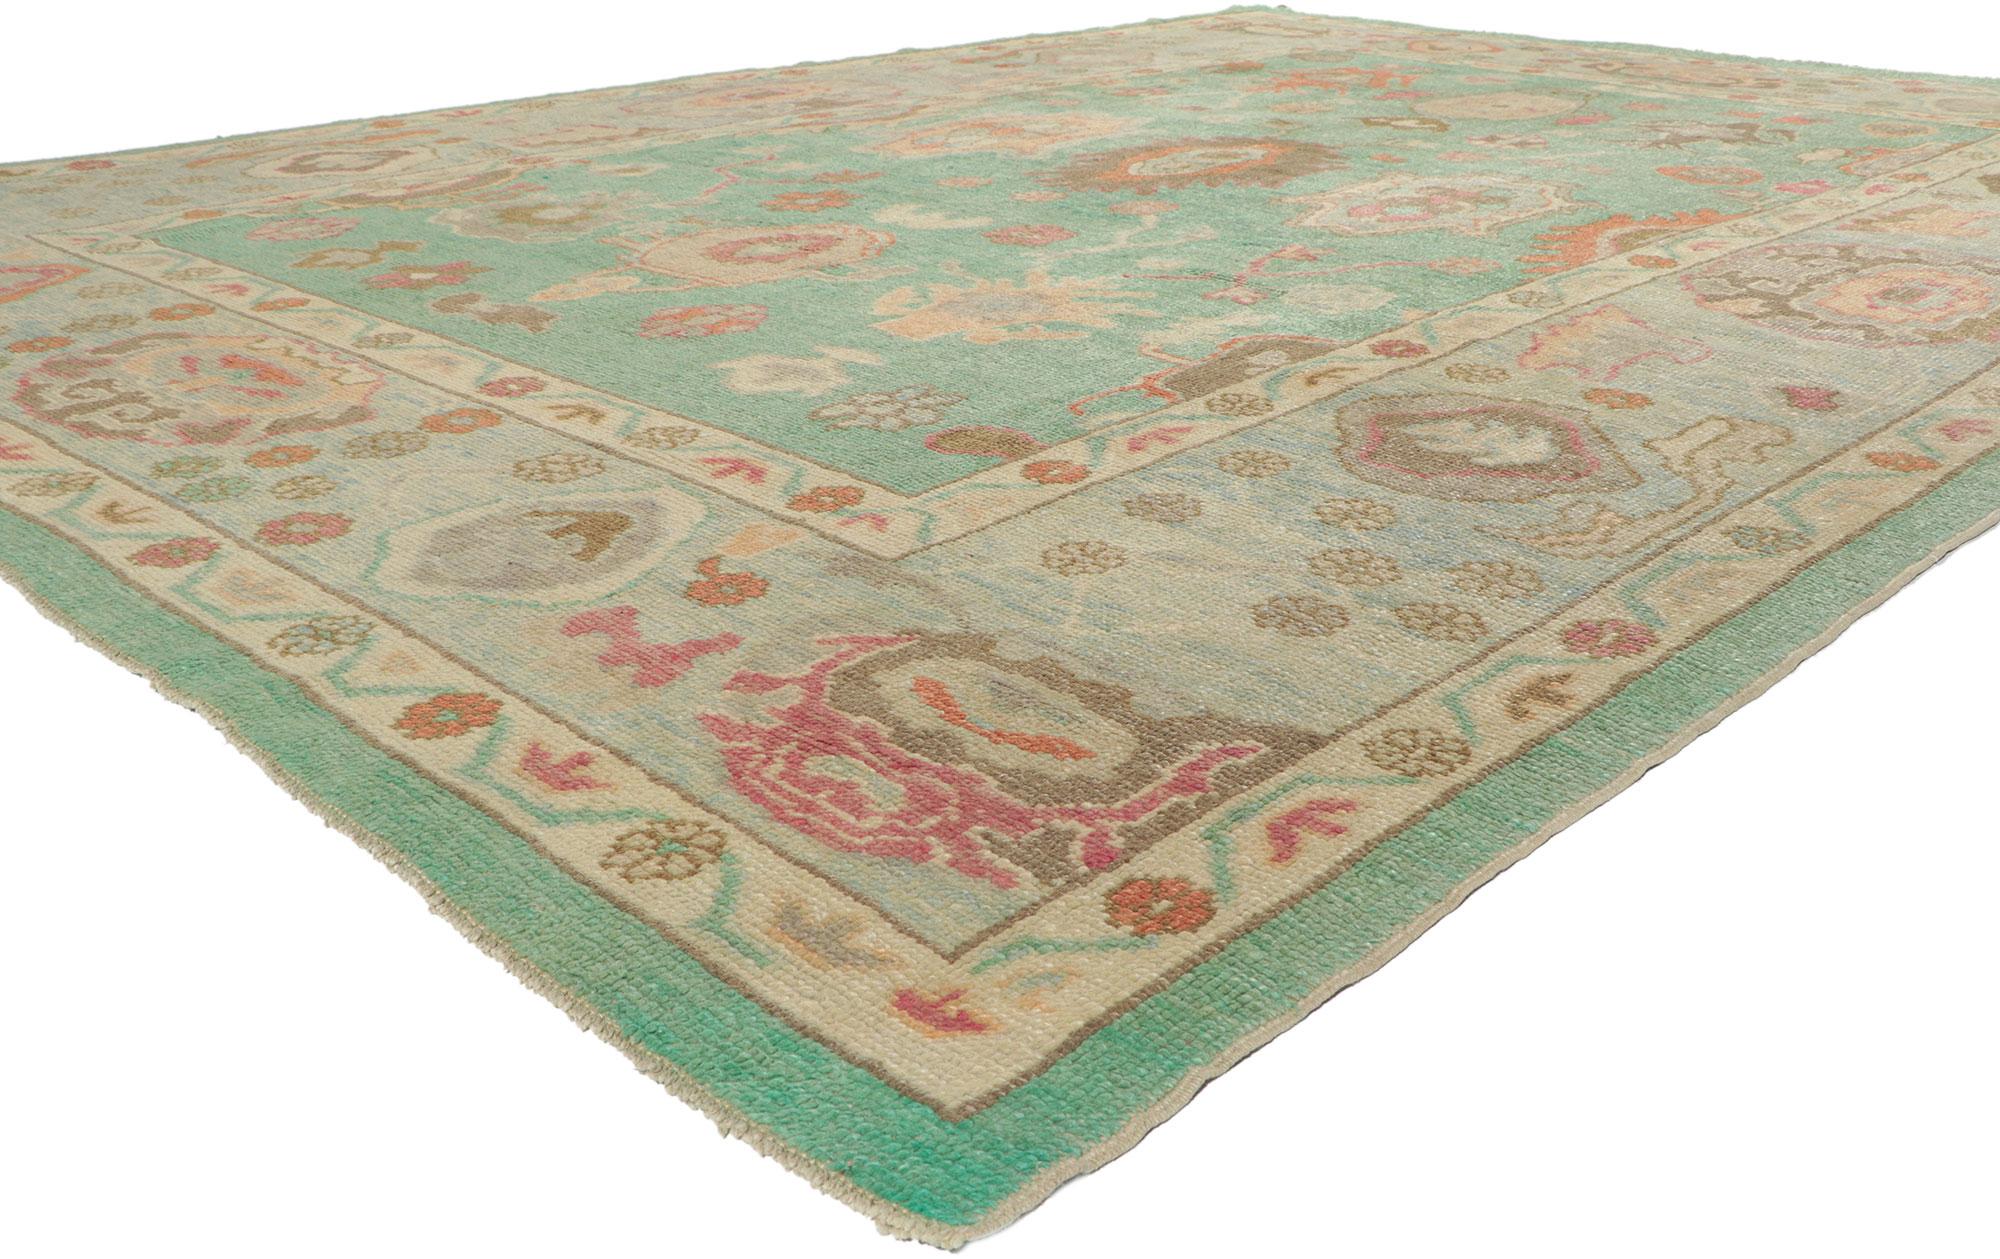 53808 New Turkish Oushak rug with Modern style, 09'11 x 13'08. Polished and playful, this hand-knotted wool contemporary Turkish Oushak rug beautifully embodies a modern style. The abrashed greenish colored field features an array of Harshang